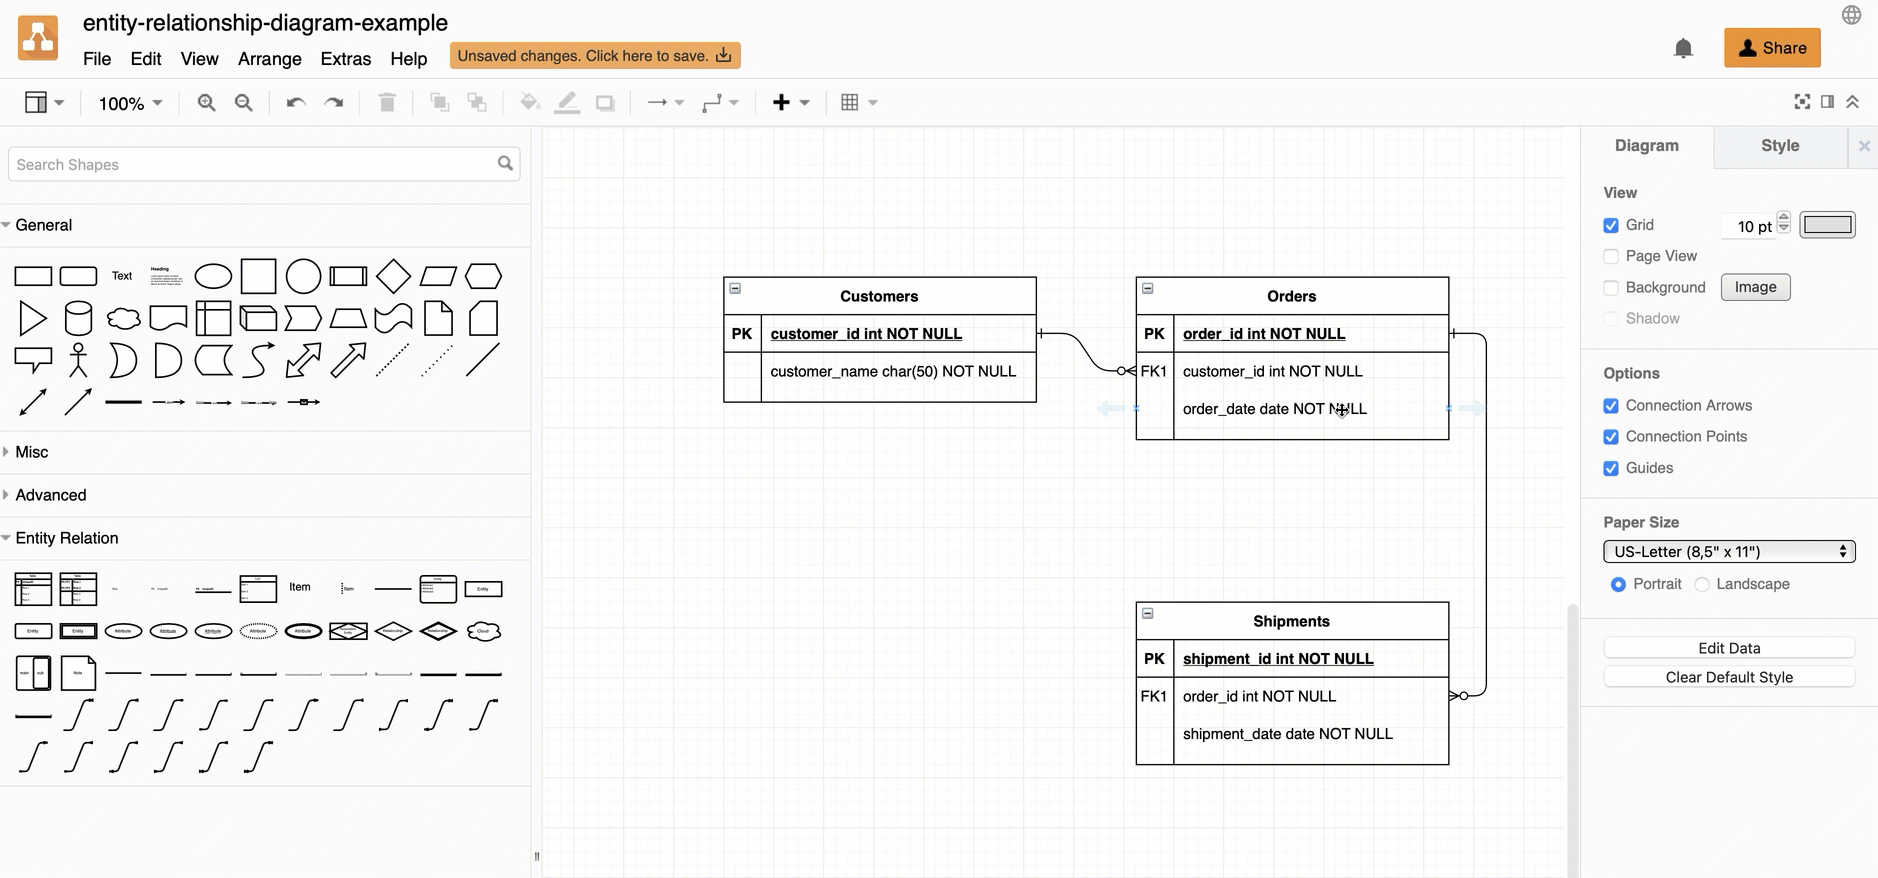 Add new rows to entity tables in an ER model in draw.io many different ways